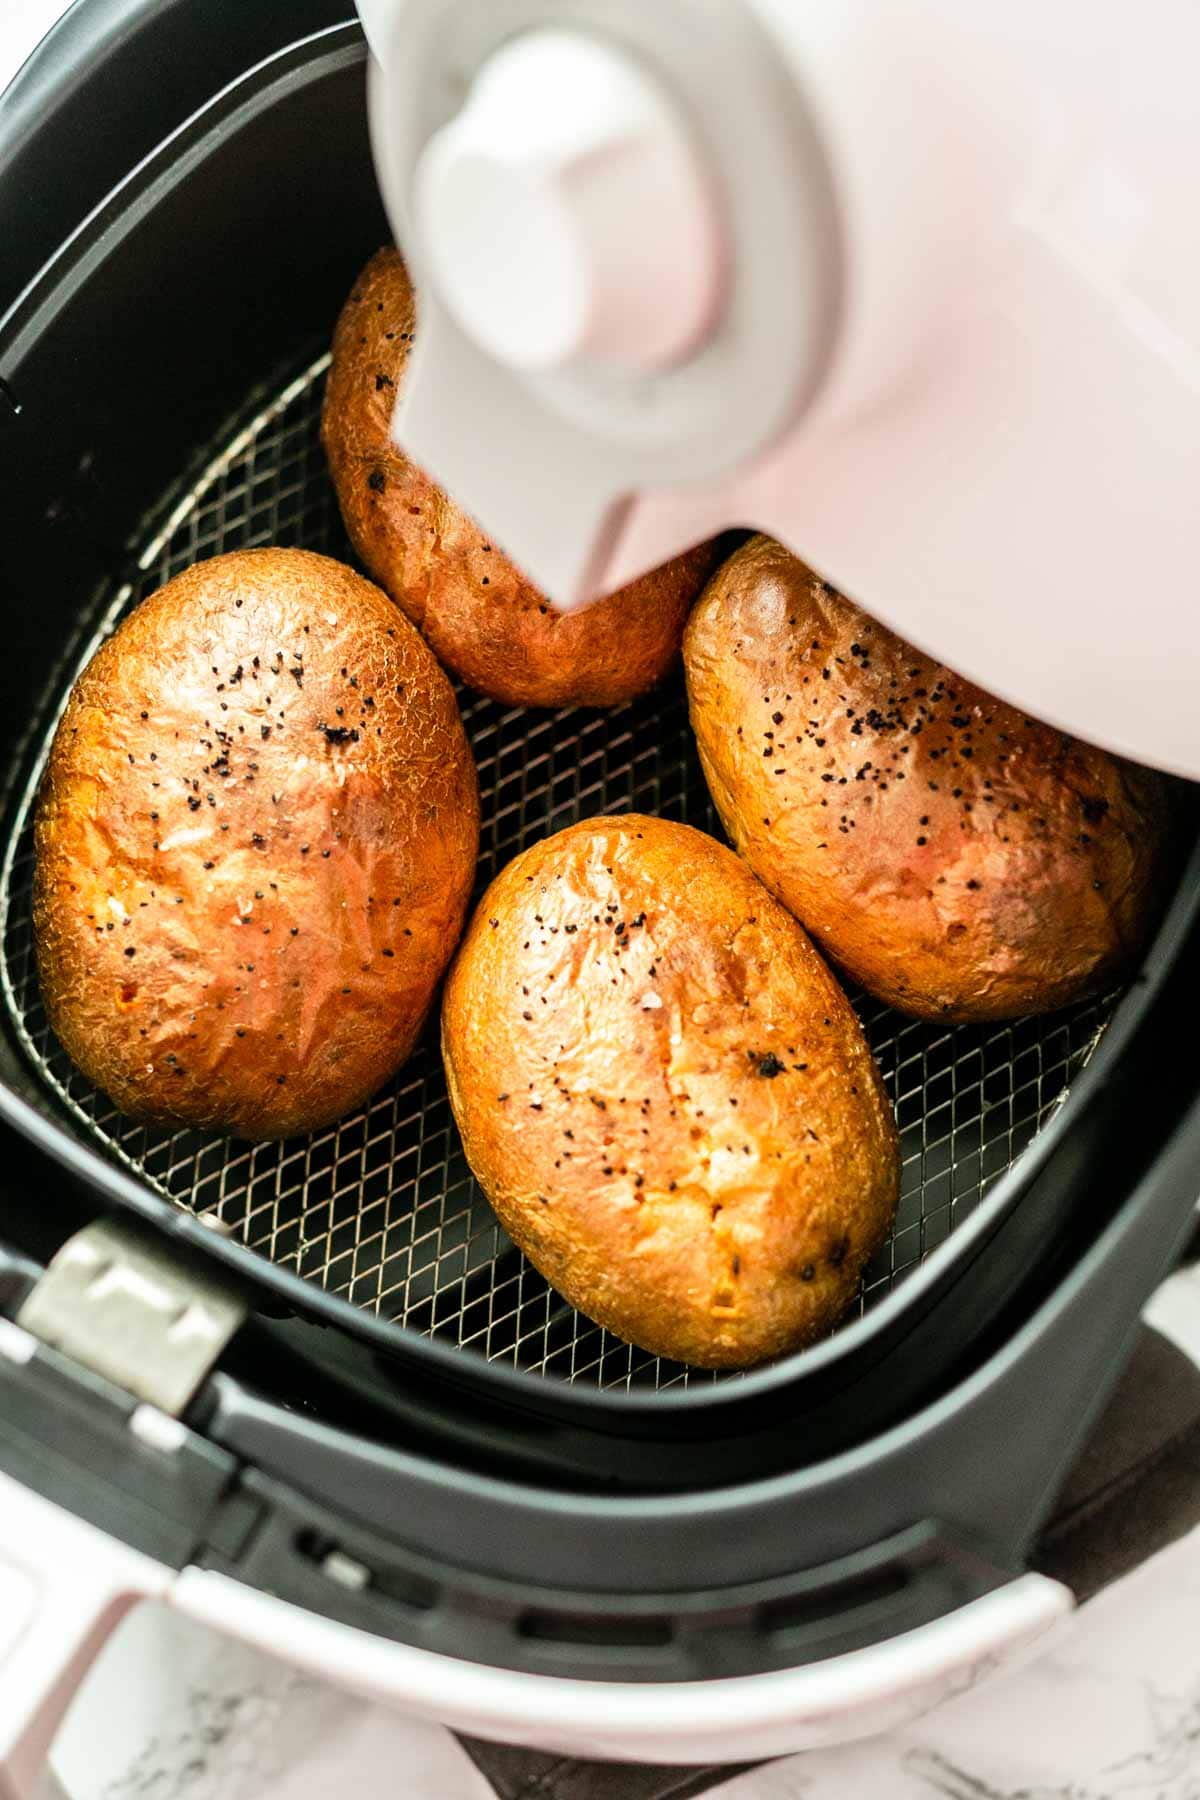 How To Make A Baked Potato In Air Fryer